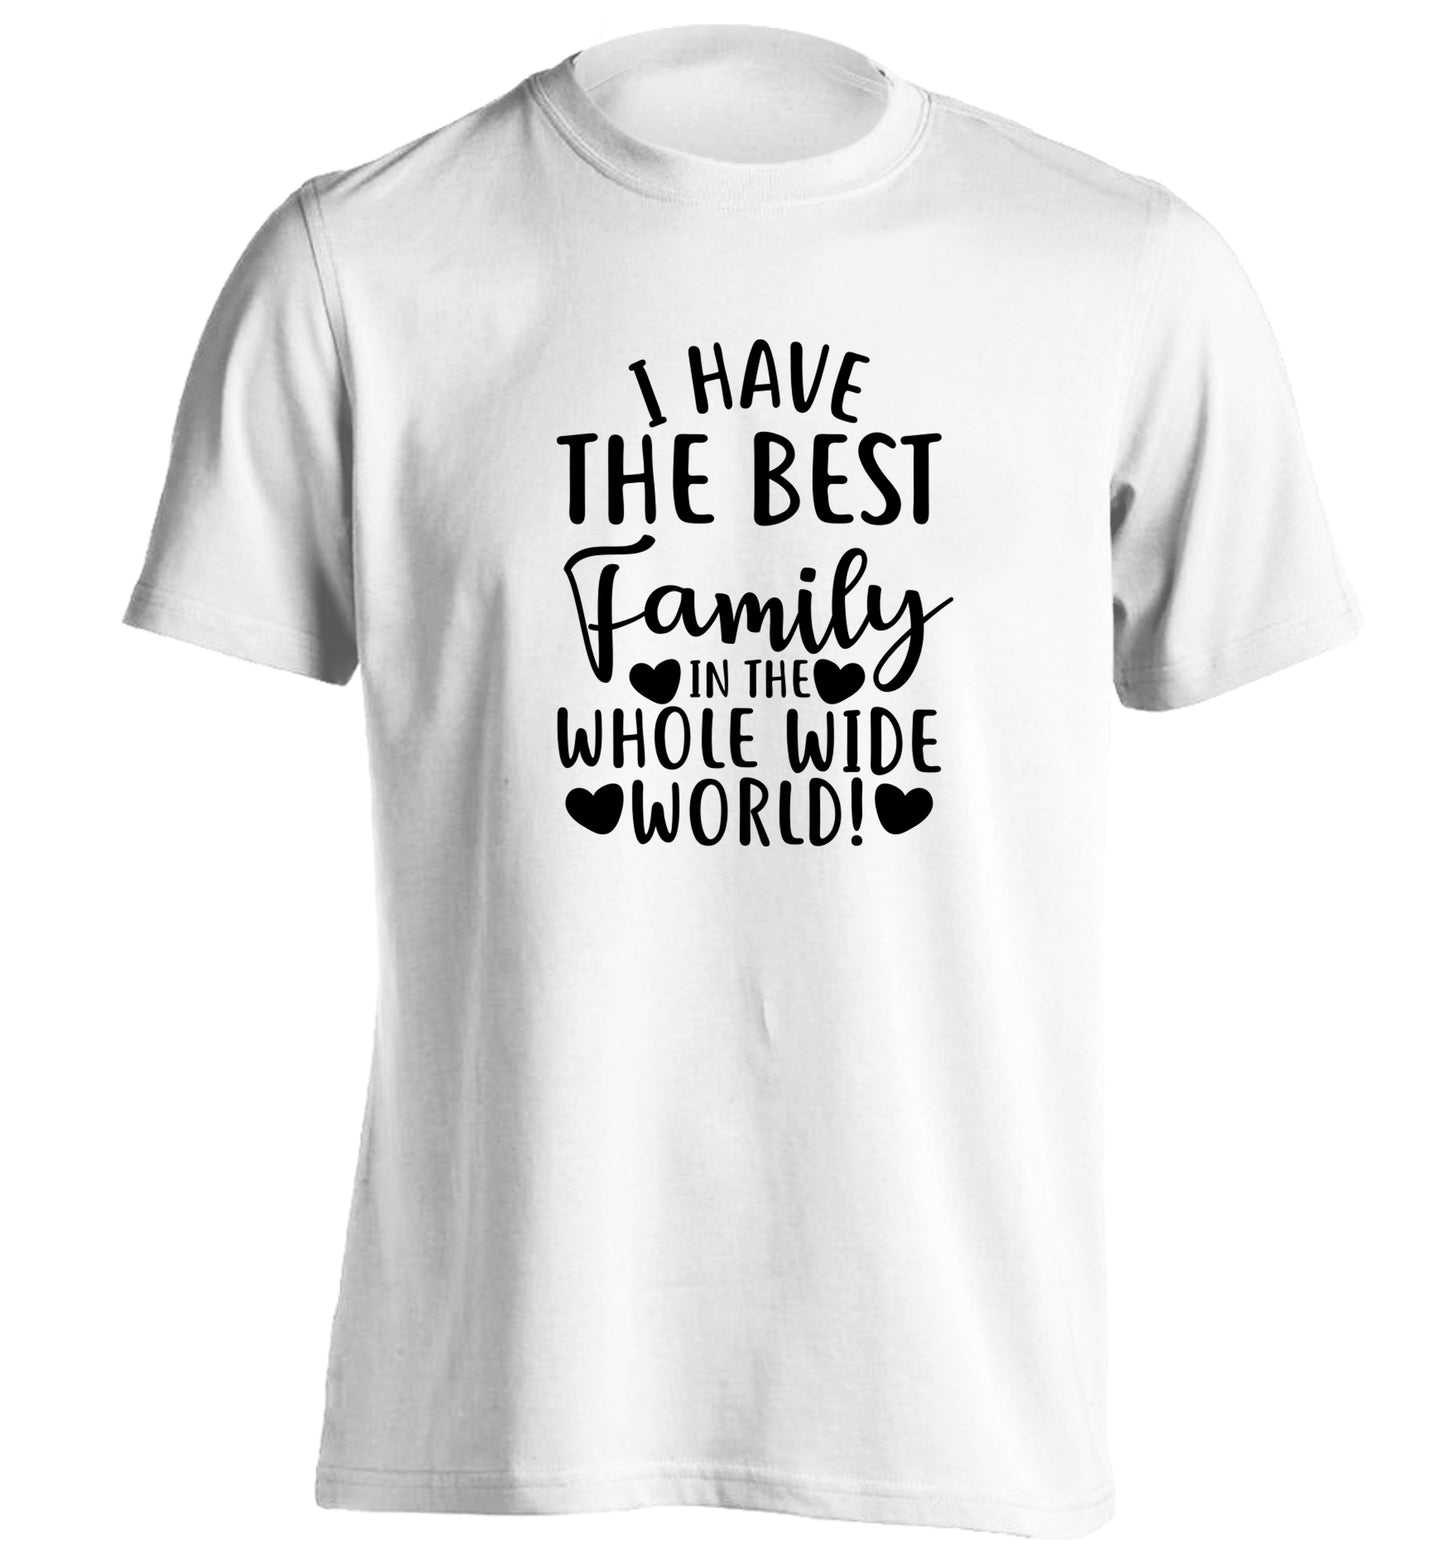 I have the best family in the whole wide world! adults unisex white Tshirt 2XL